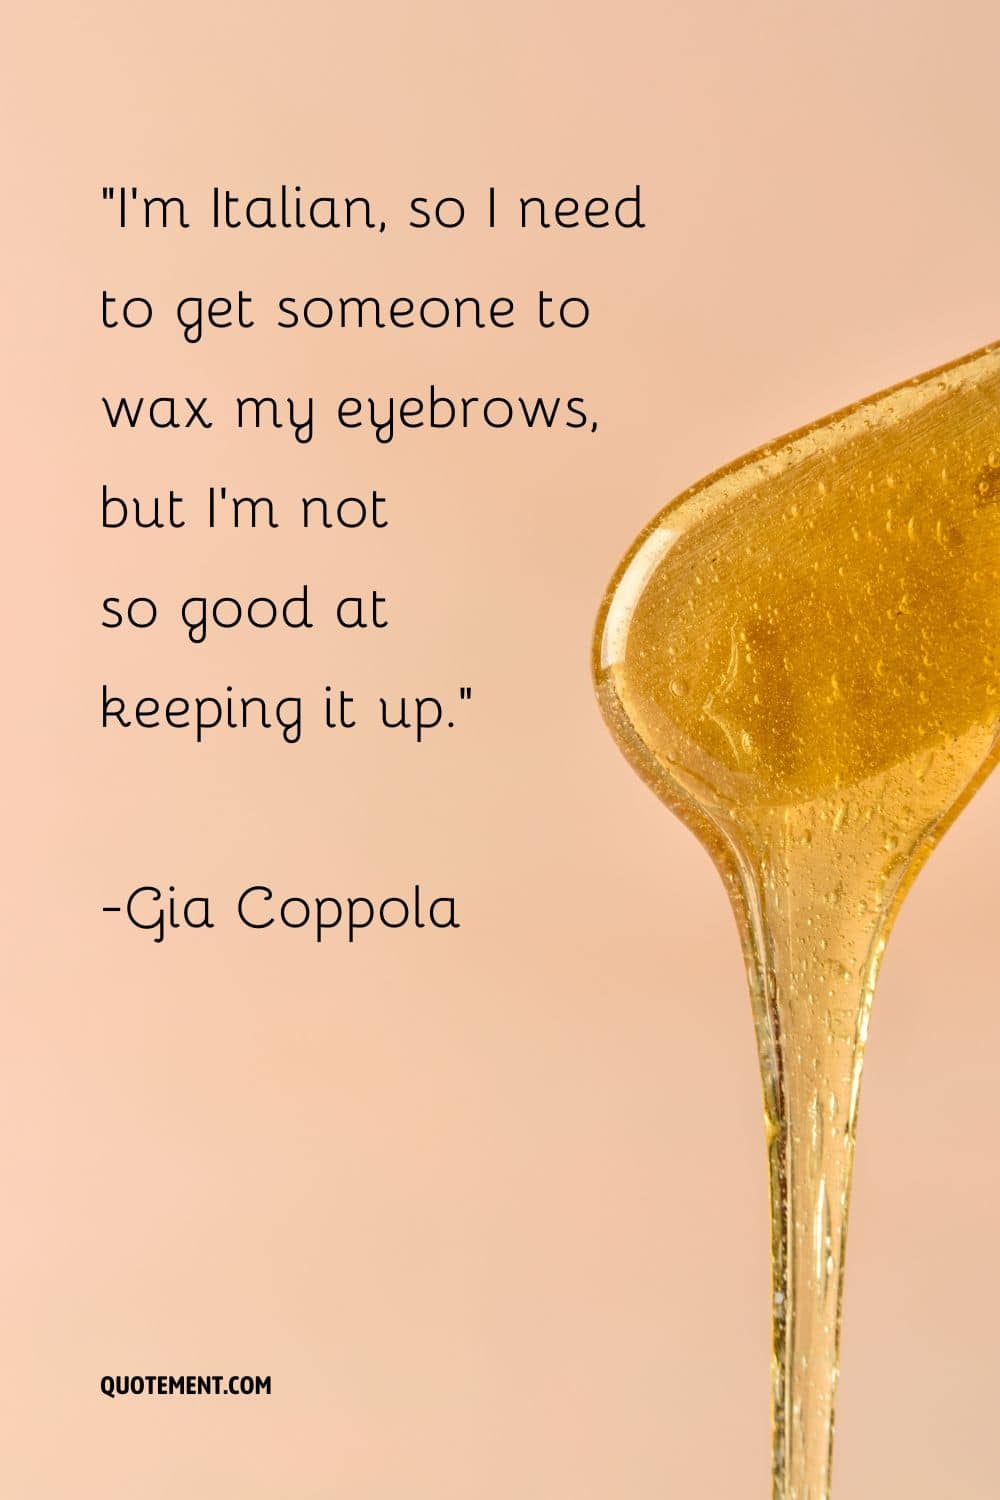 I’m Italian, so I need to get someone to wax my eyebrows, but I’m not so good at keeping it up.